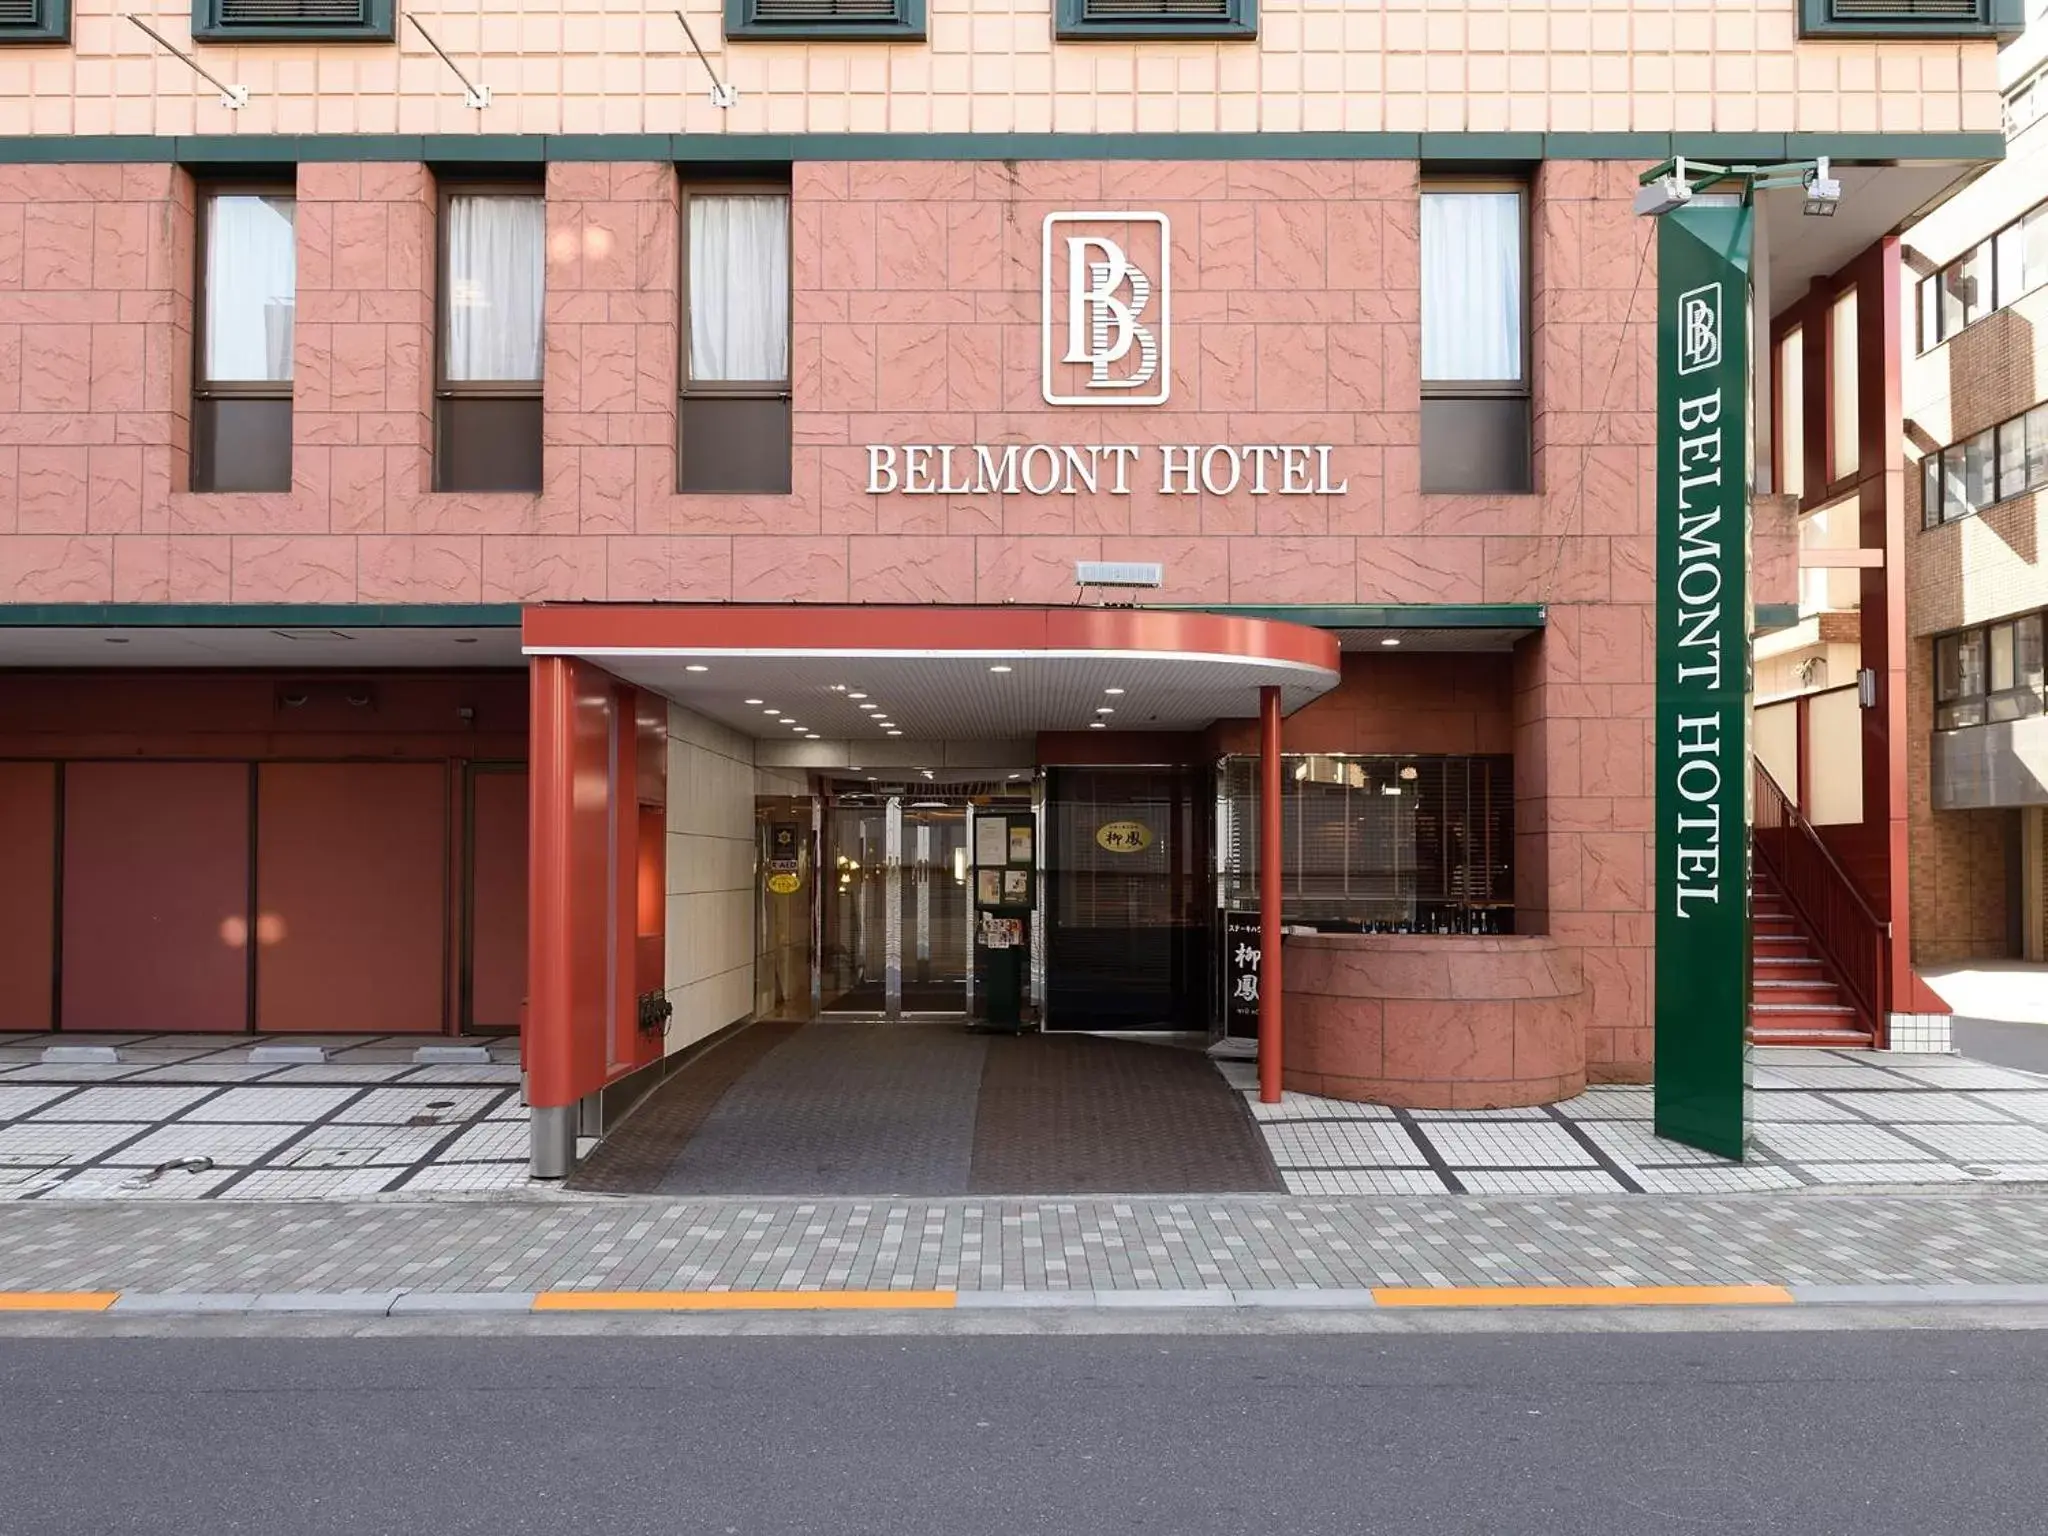 Area and facilities in Belmont Hotel